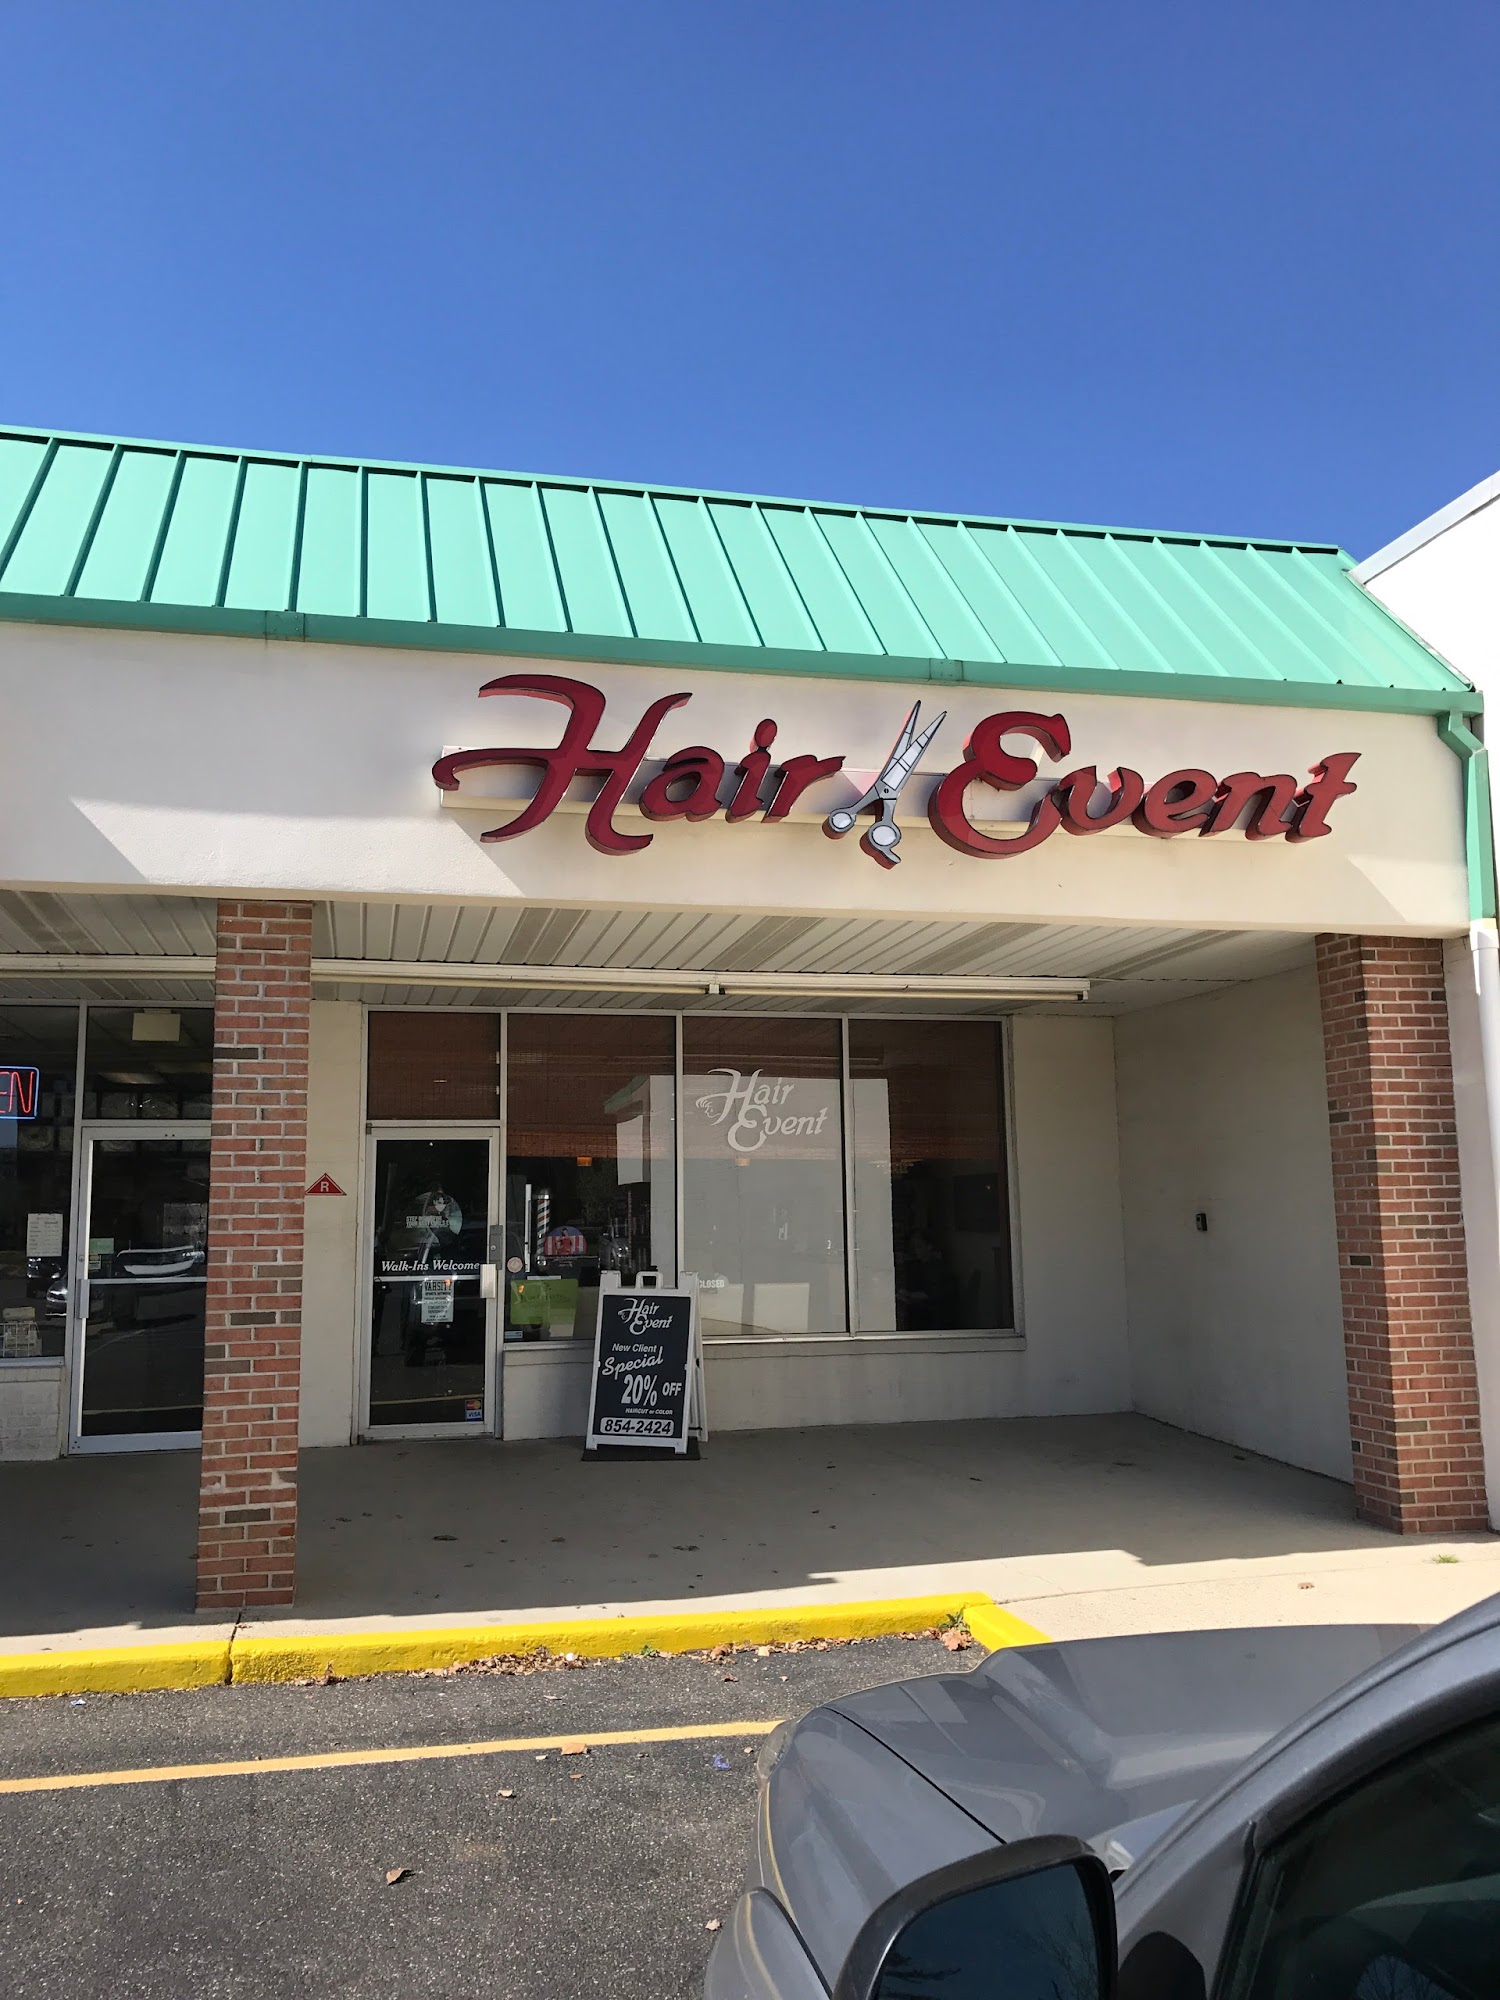 Hair Event 413 W Crystal Lake Ave, Haddonfield New Jersey 08033